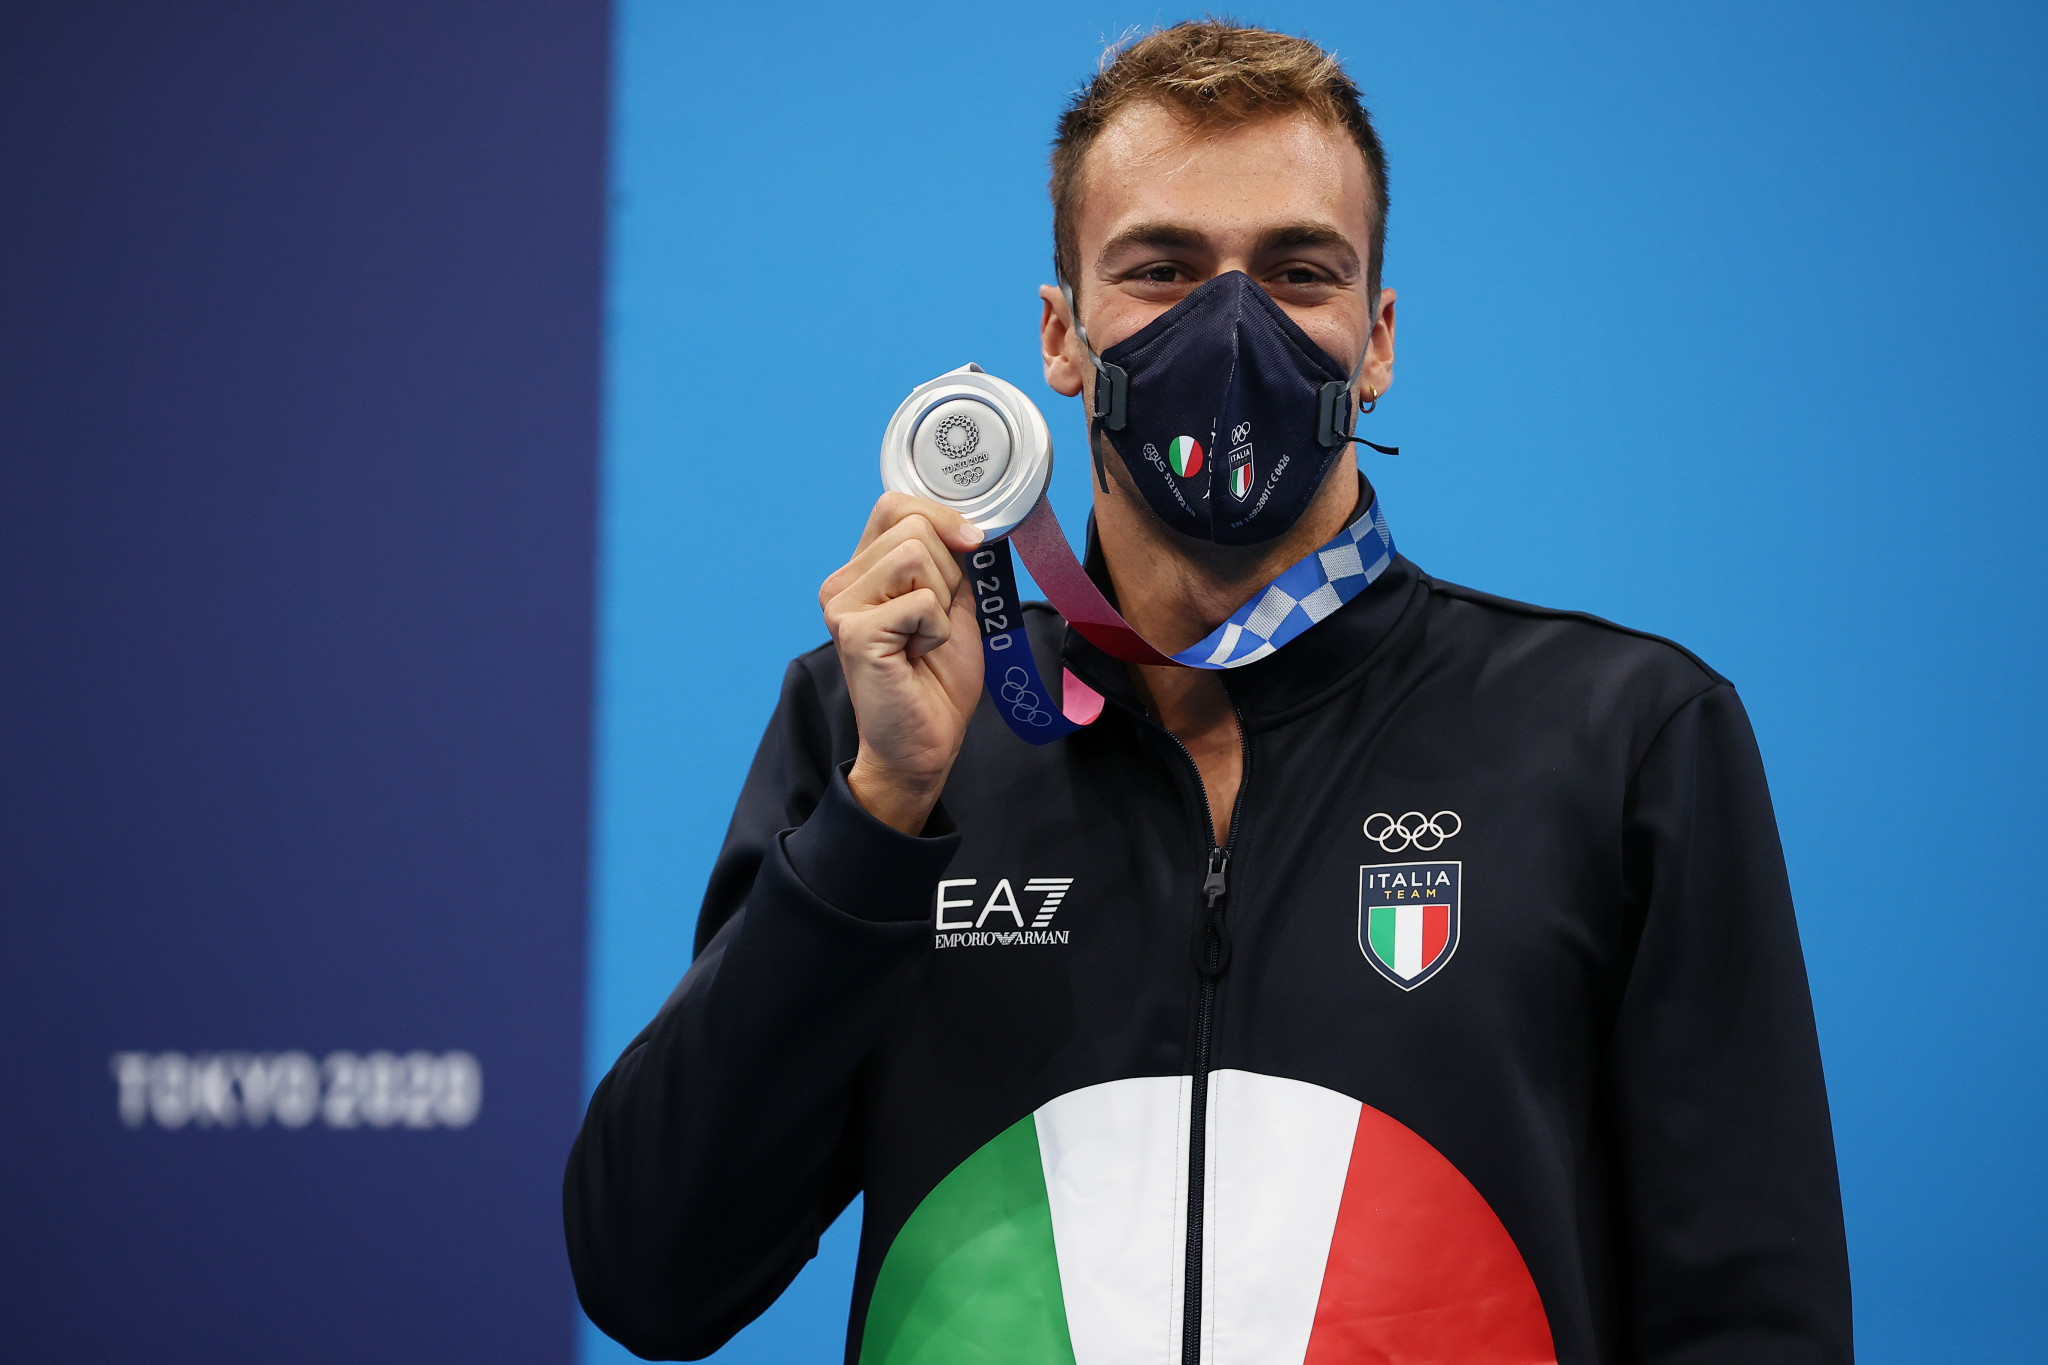 Gregorio Paltrinieri will be looking to follow his silver in the men's 800m freestyle with another medal in the 10km marathon ©Getty Images